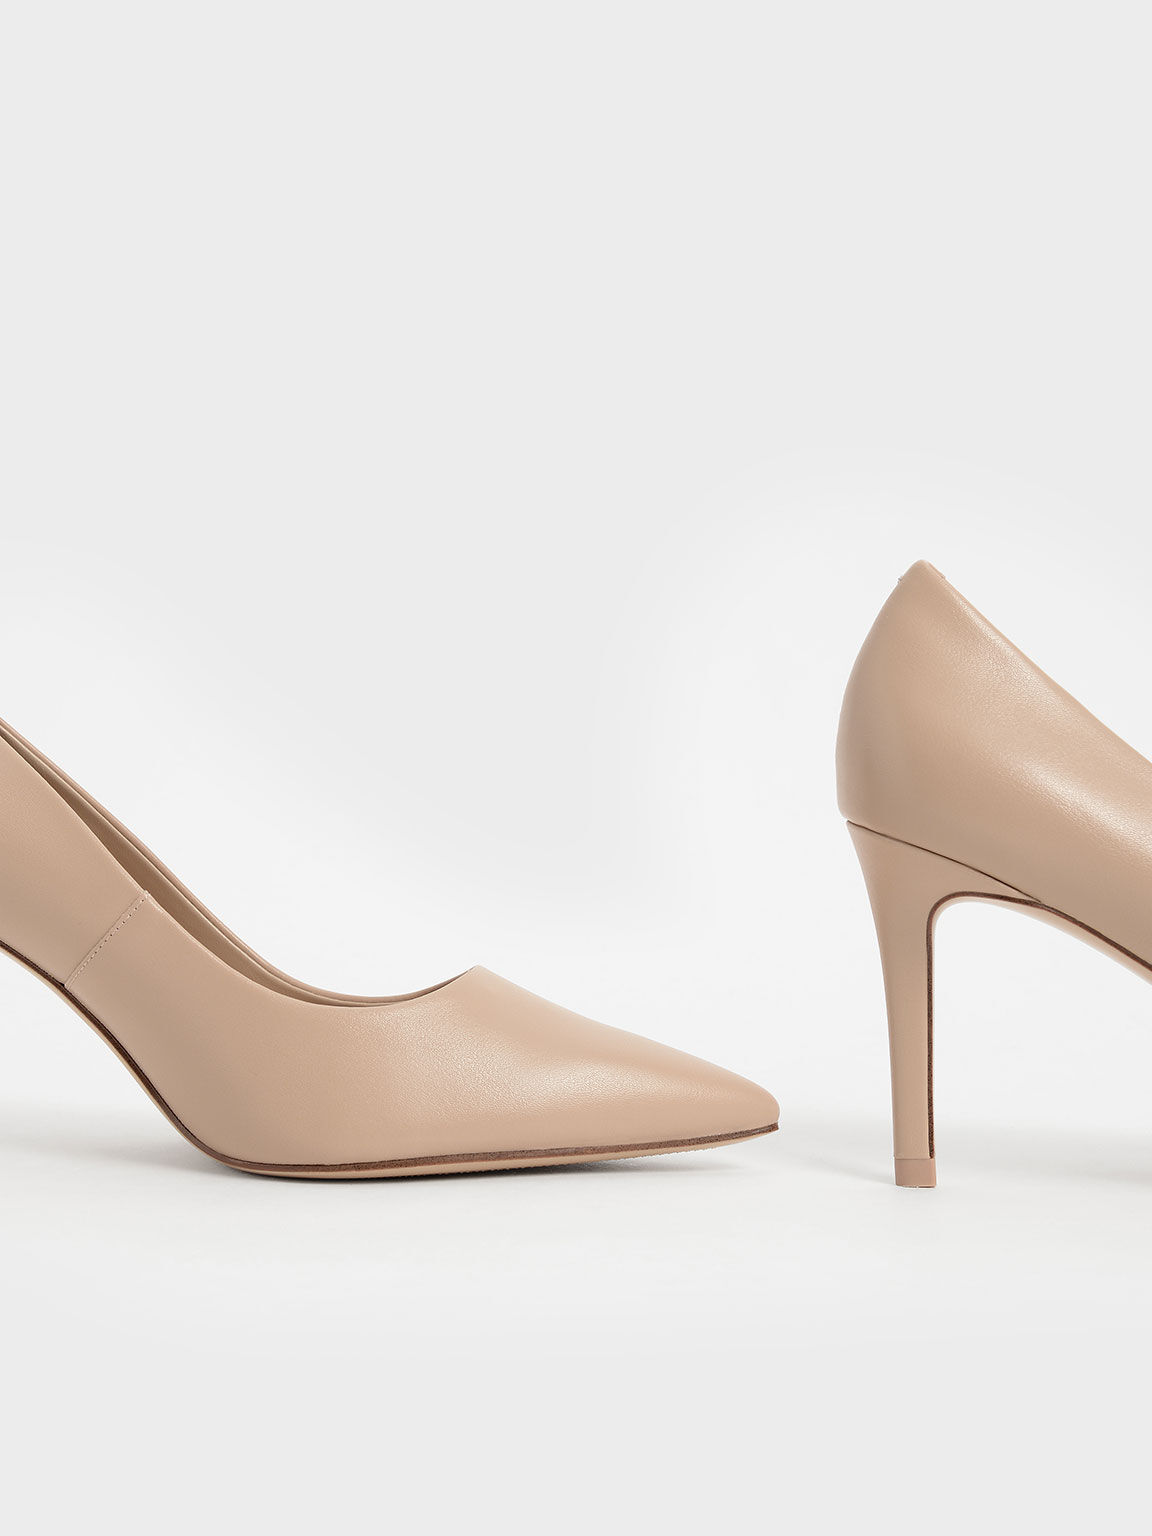 Nude Emmy Pointed-Toe Stiletto Pumps - CHARLES & KEITH US